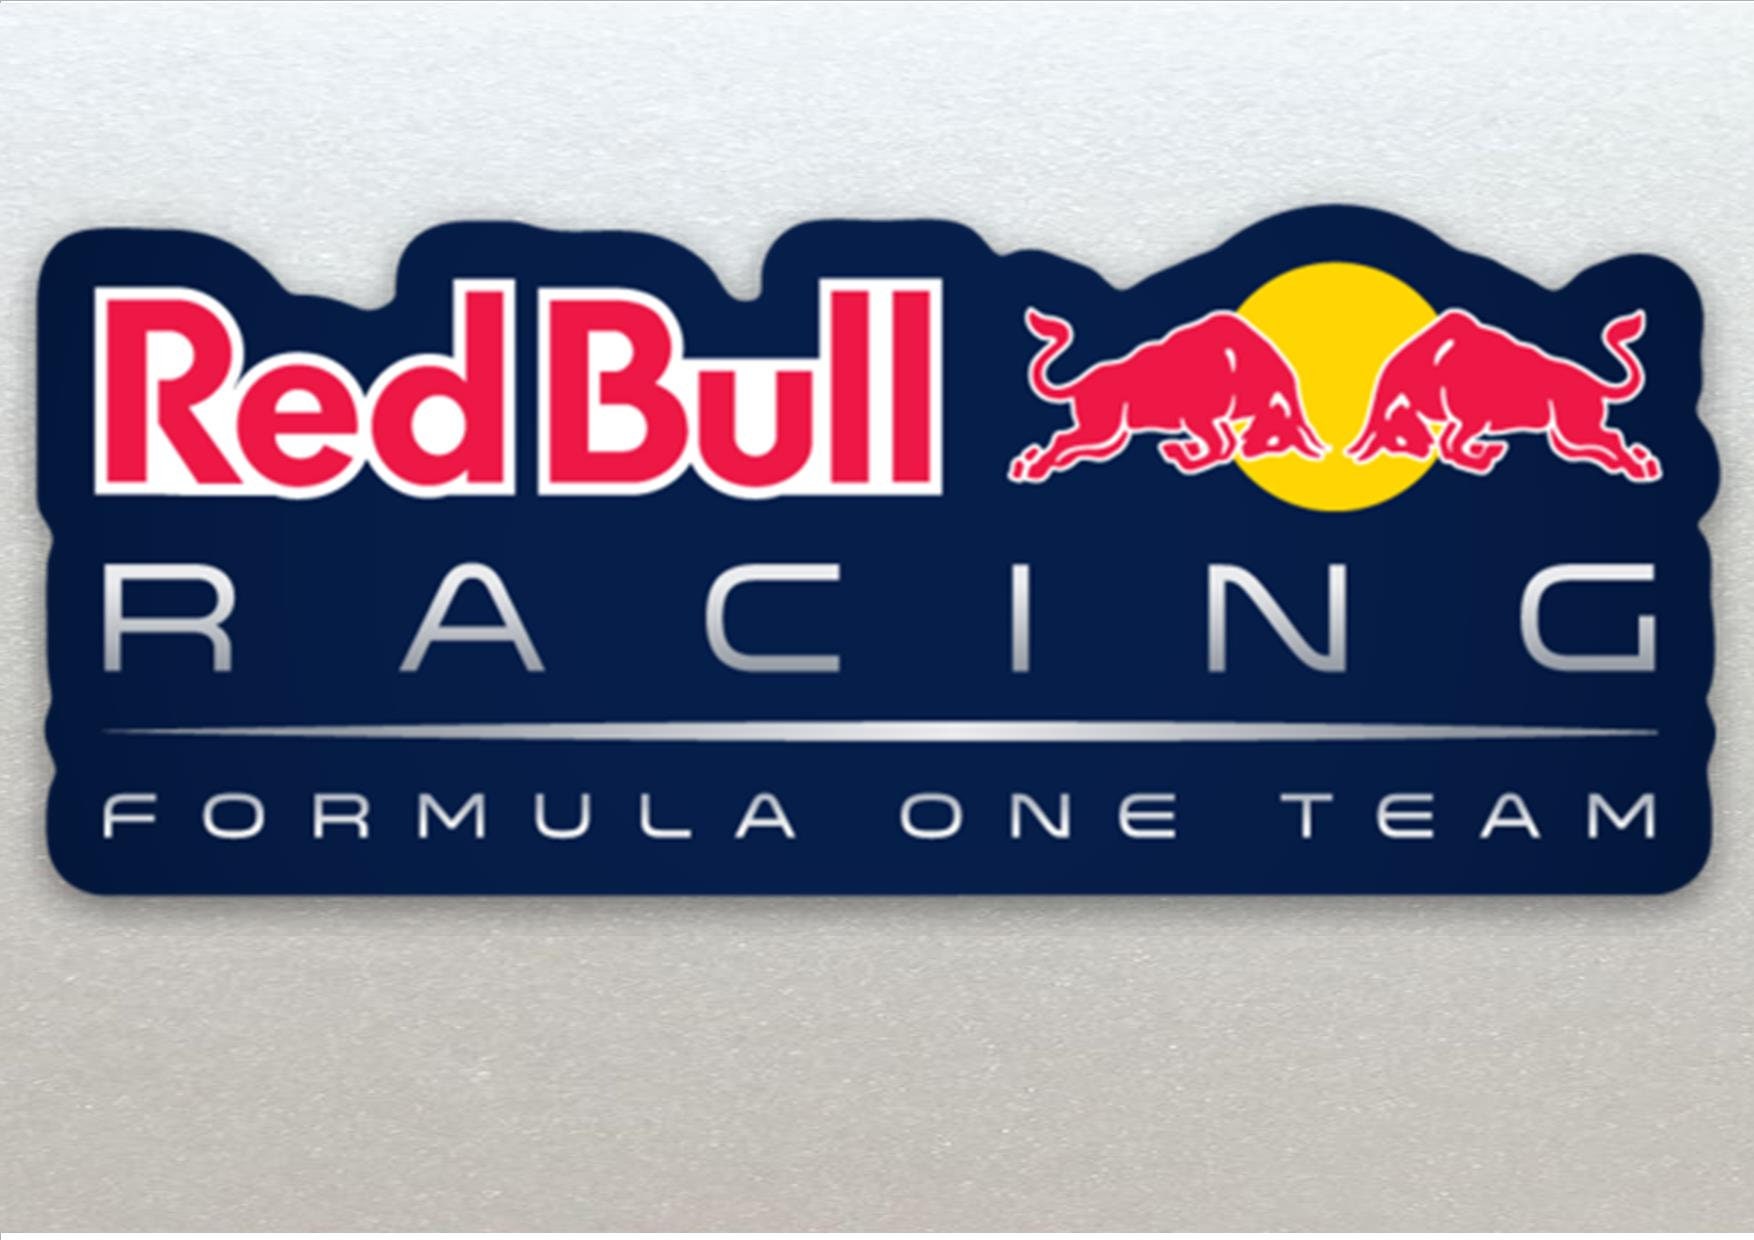 Red Bull Formula One F1 Racing Blue Background Stickers X2 for Car, Van,  Window Etc. 125mm 12.5cm Length High Quality Laminated Vinyl 